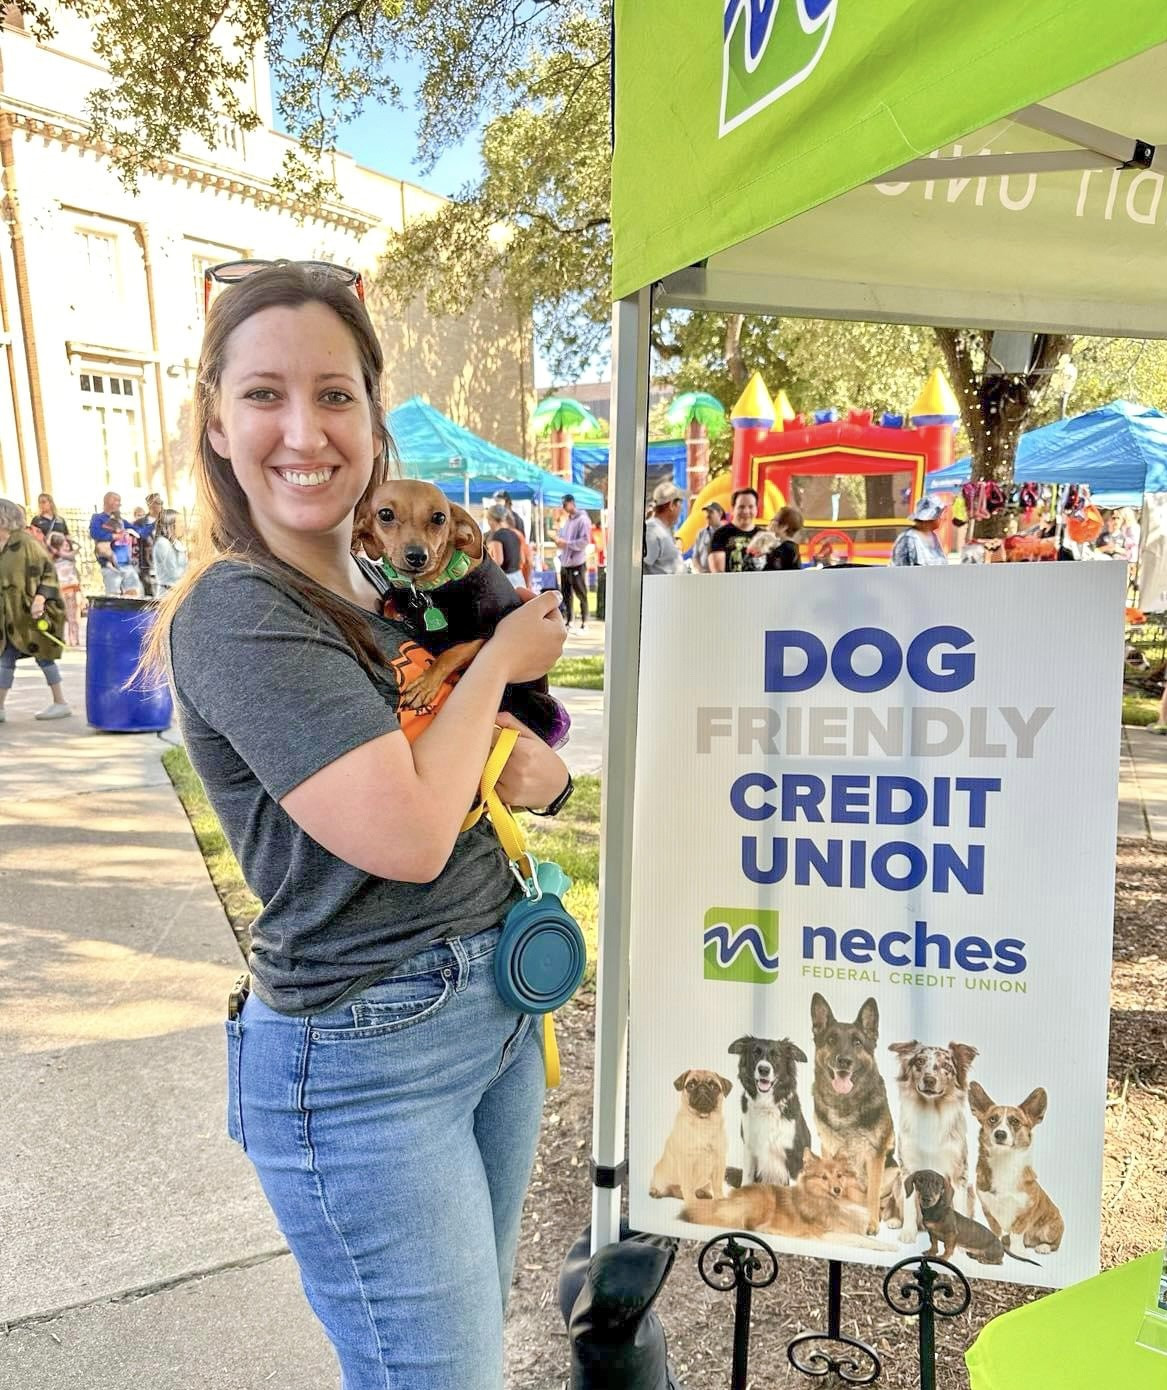 NFCU Employee + their furry companion at the Annual Dogtober Fest Event